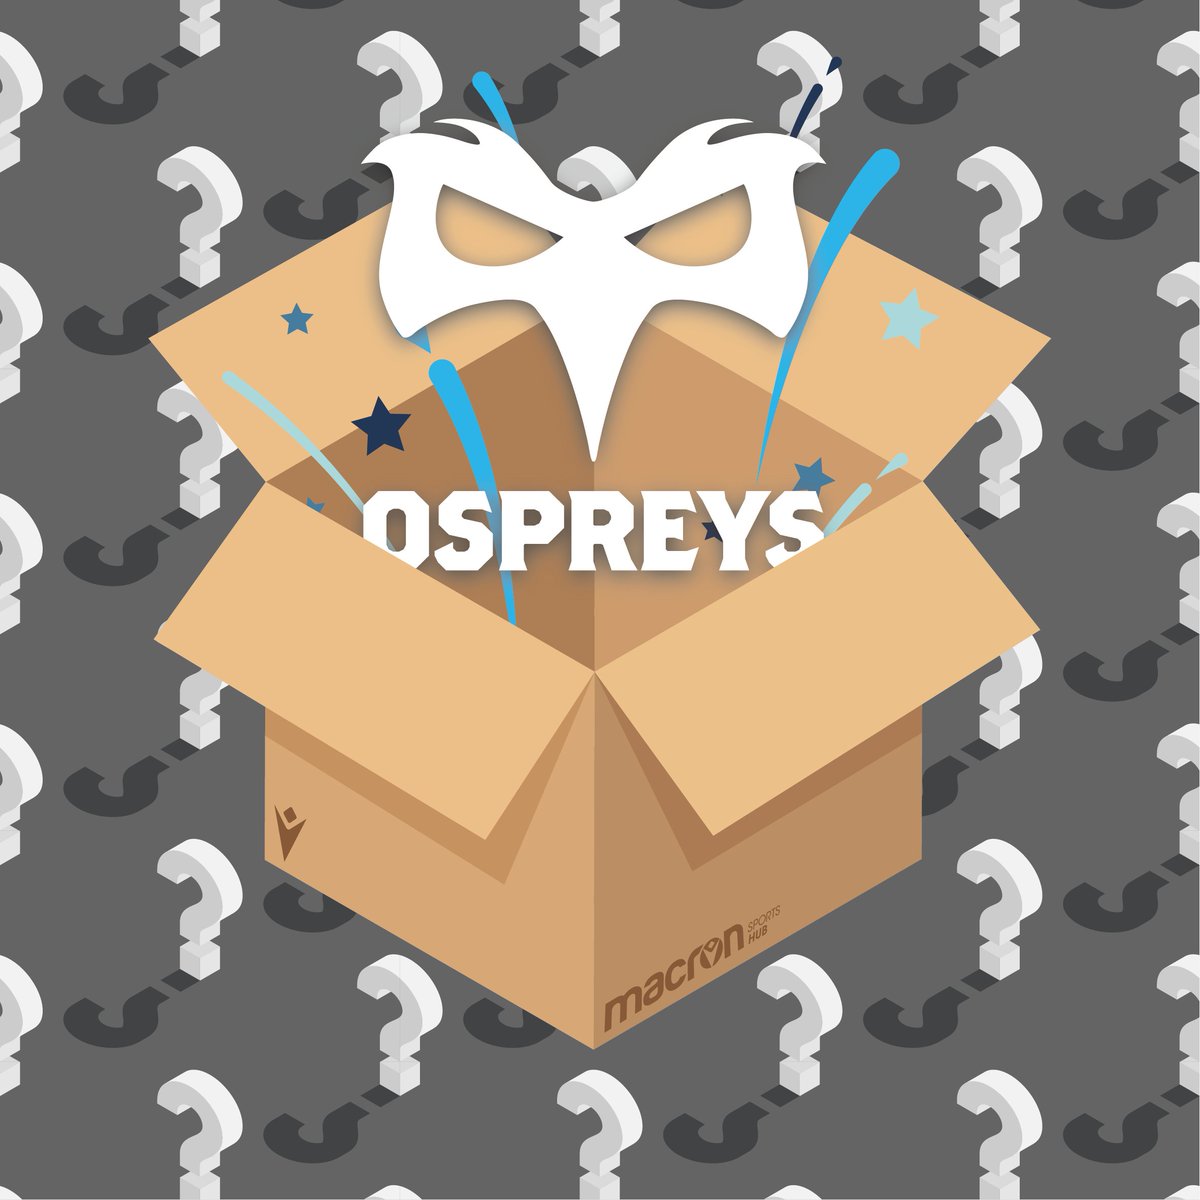 Our Ospreys Mystery Boxes are the perfect way to get set for Judgement Day!🎁 🏉Could contain Replicas, Teamwear, Training, & MORE! PLUS! We'll be throwing in a signed rugby ball in random boxes👀 Check them out here👇 shorturl.at/hA4LU #Macron #Ospreys #Rugby @ospreys